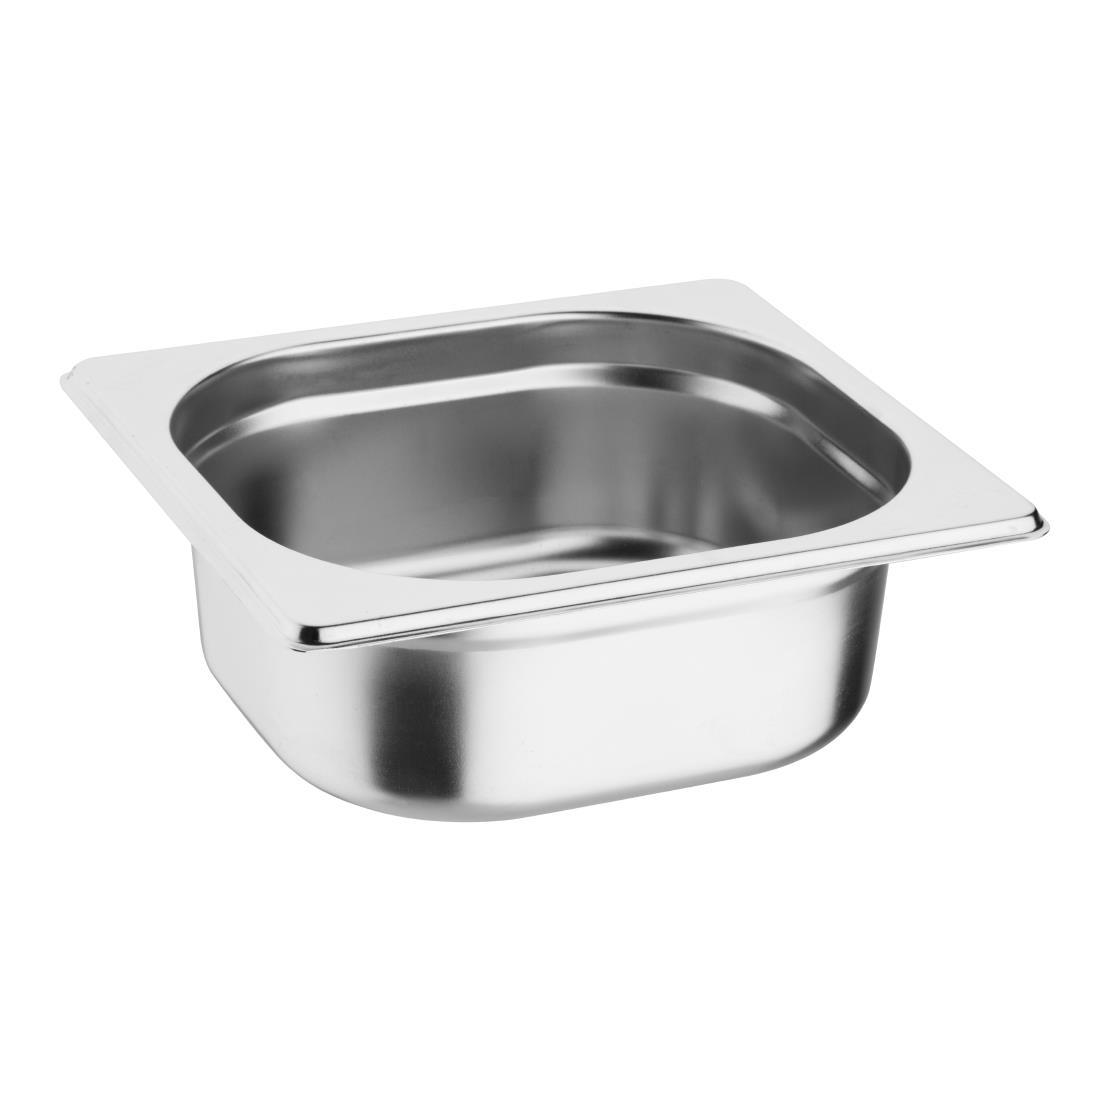 Vogue Stainless Steel 1/6 Gastronorm Pan 65mm - K985  - 1